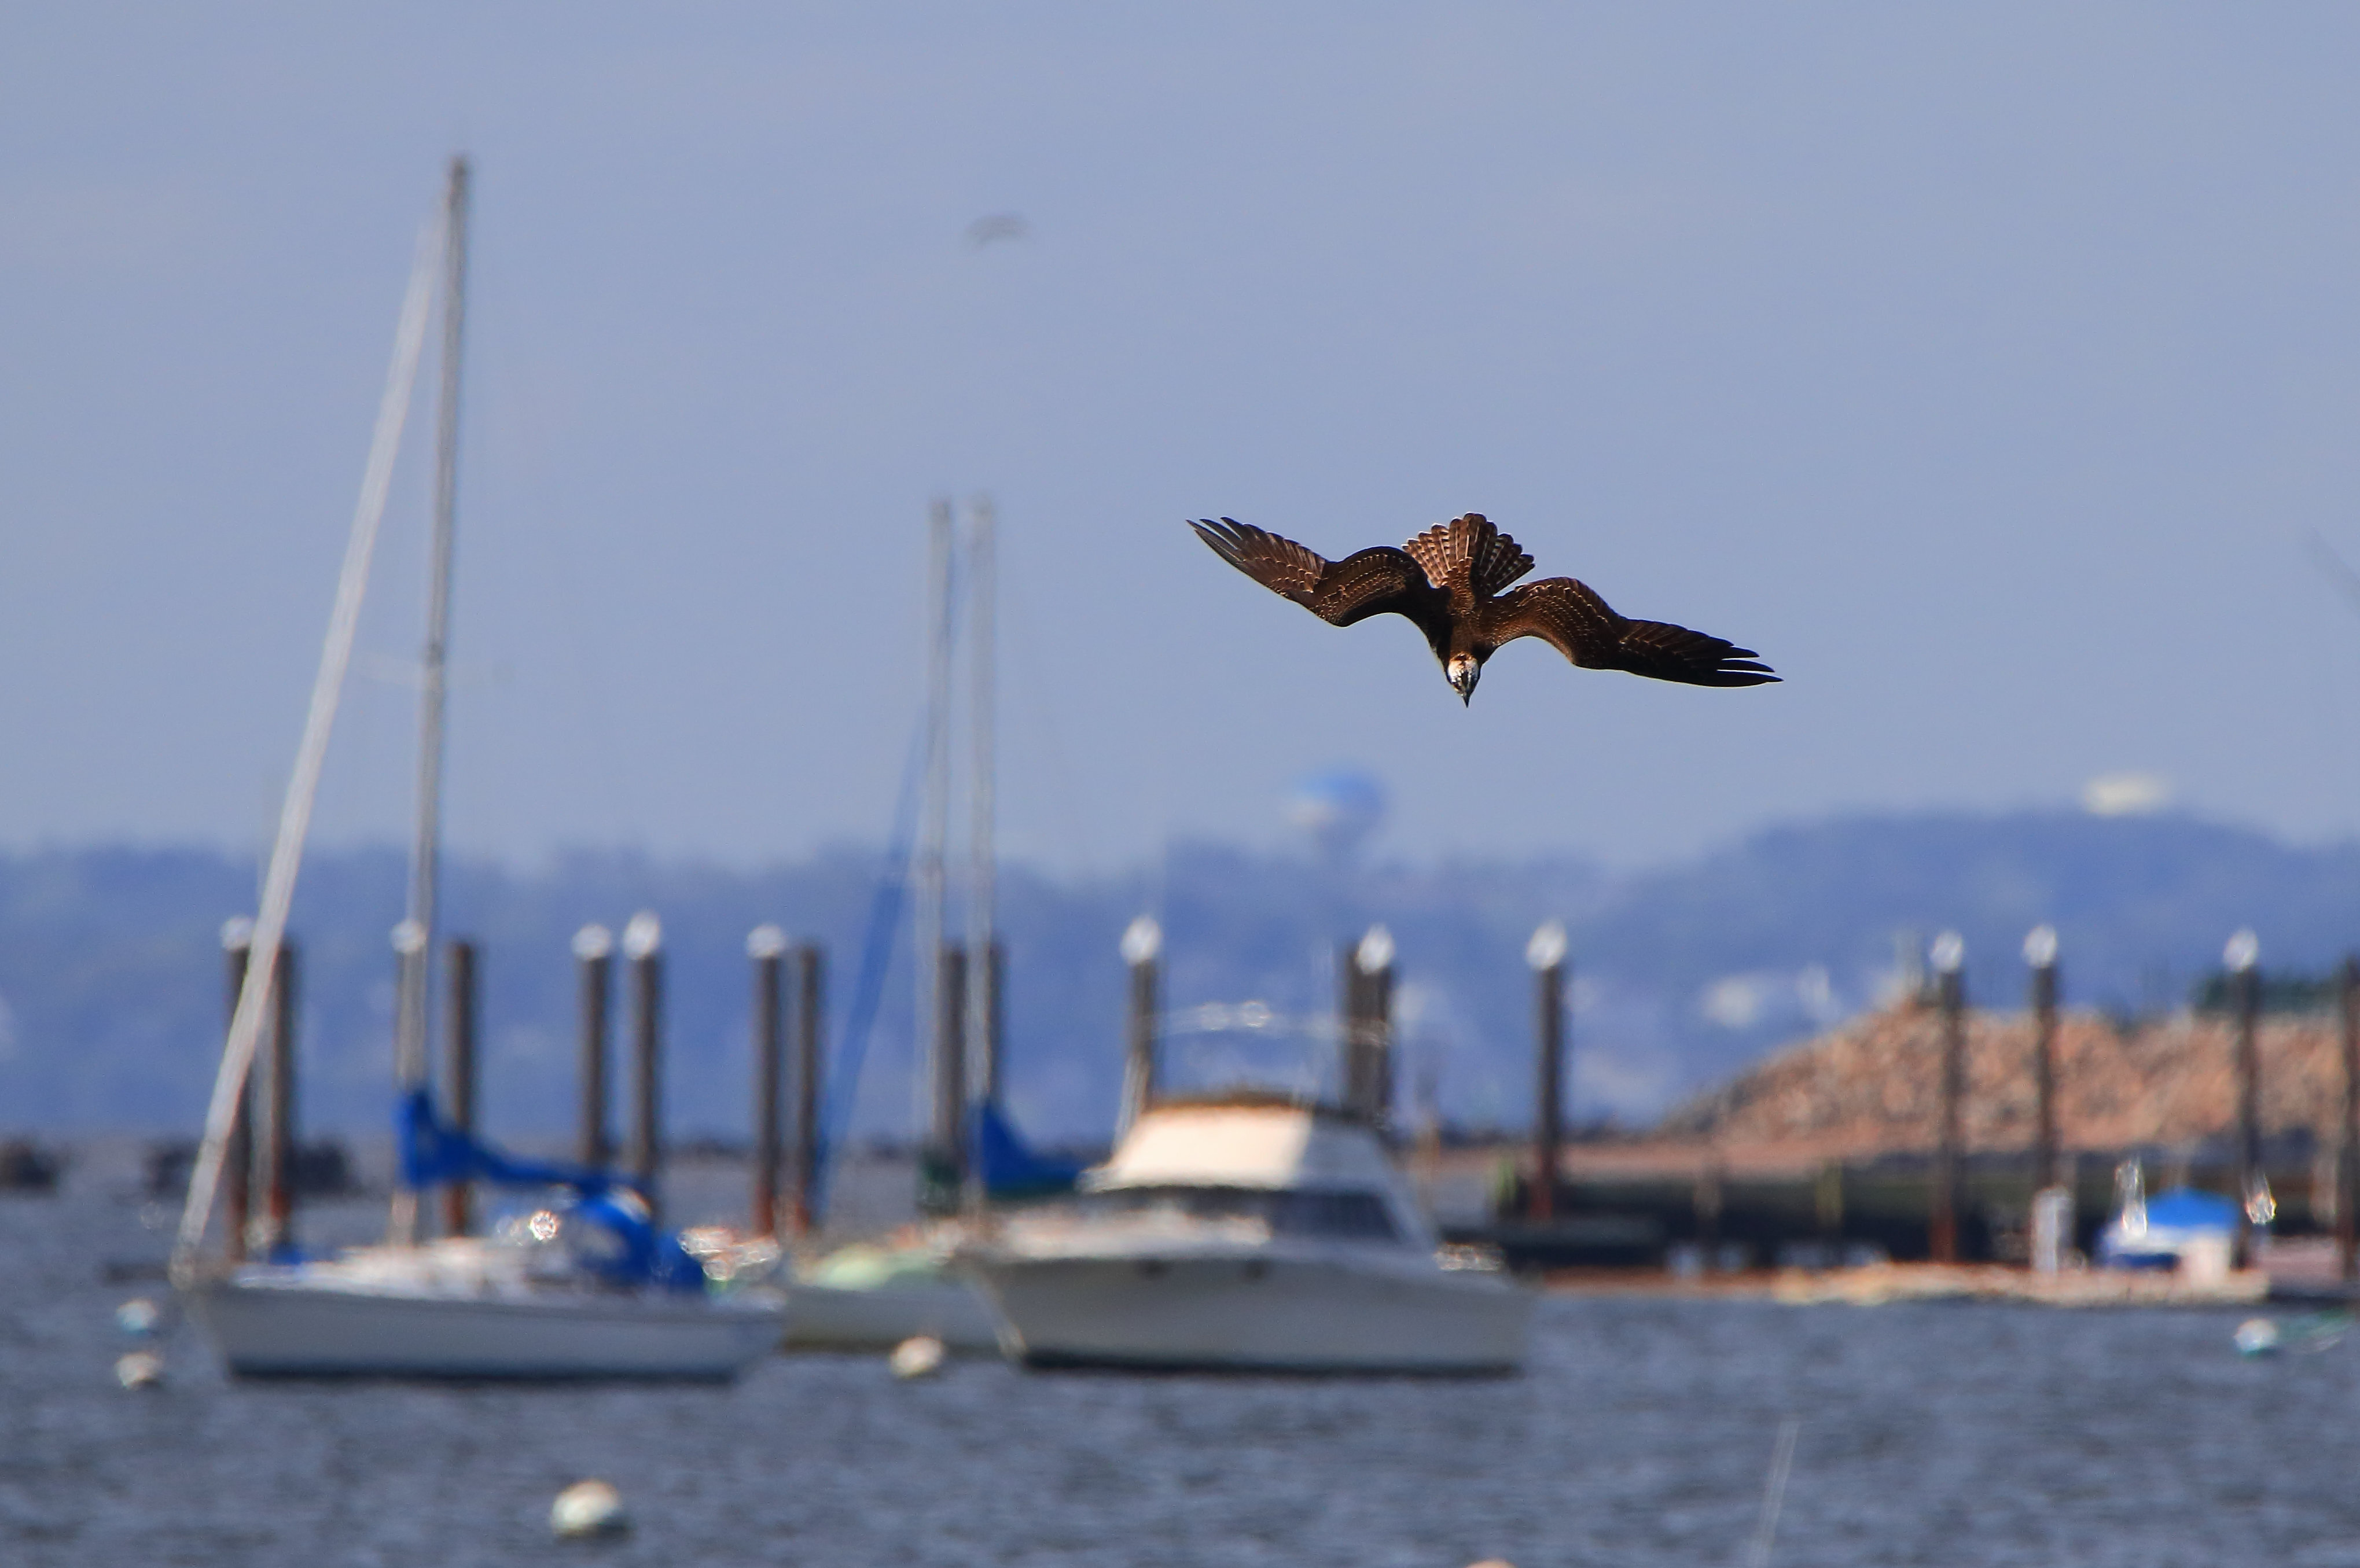 An Osprey dives in Great Kills Harbor. Photo: <a href="https://www.flickr.com/photos/51819896@N04/" target="_blank">Lawrence Pugliares</a>